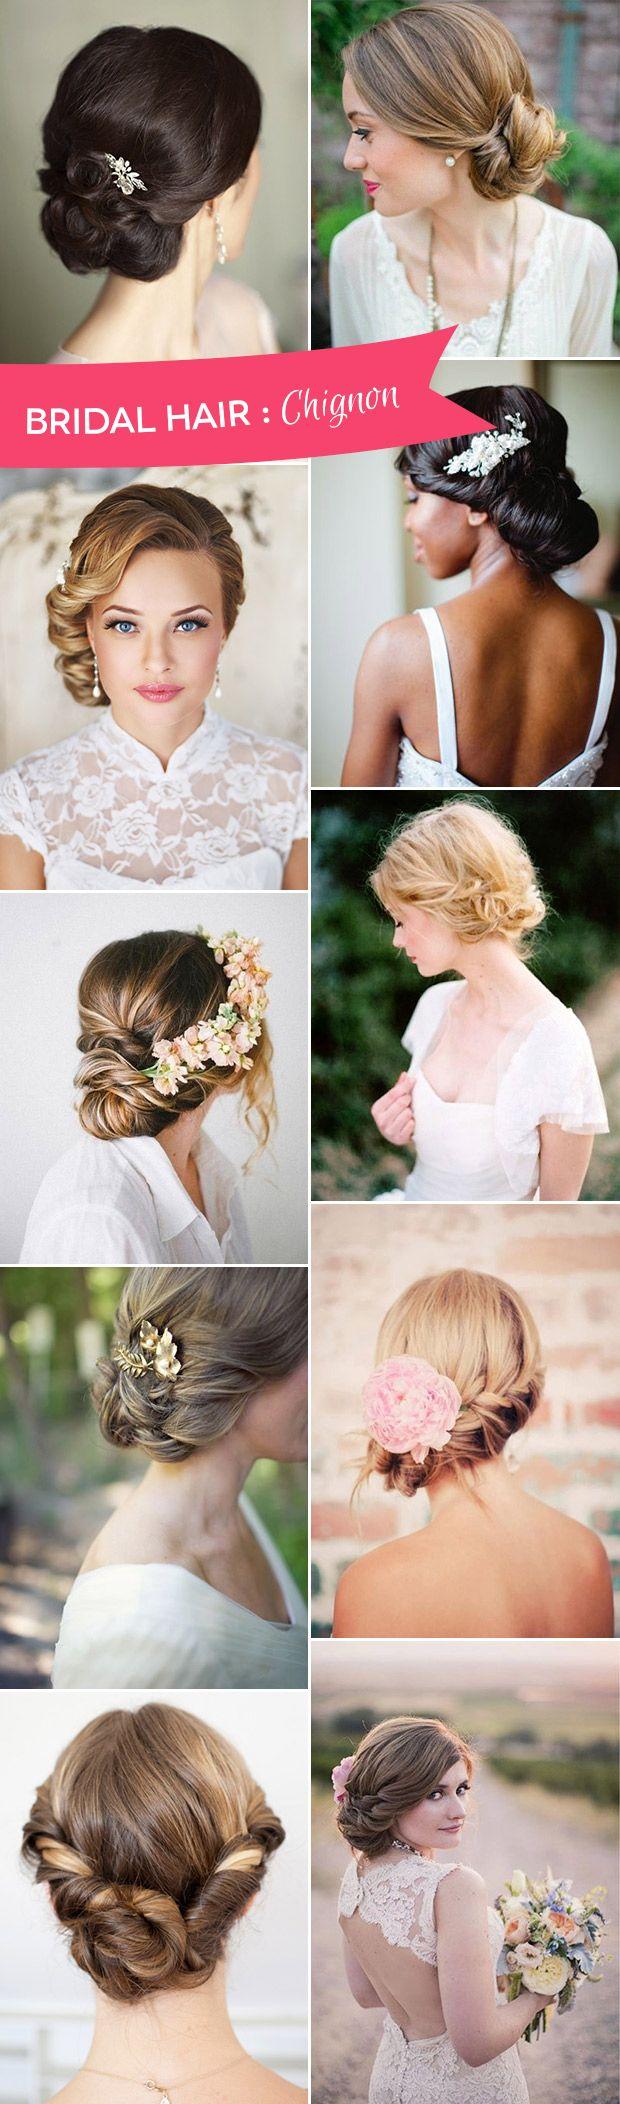 Wedding - The Charm Of Chignons - The Simplest Wedding Hairstyle